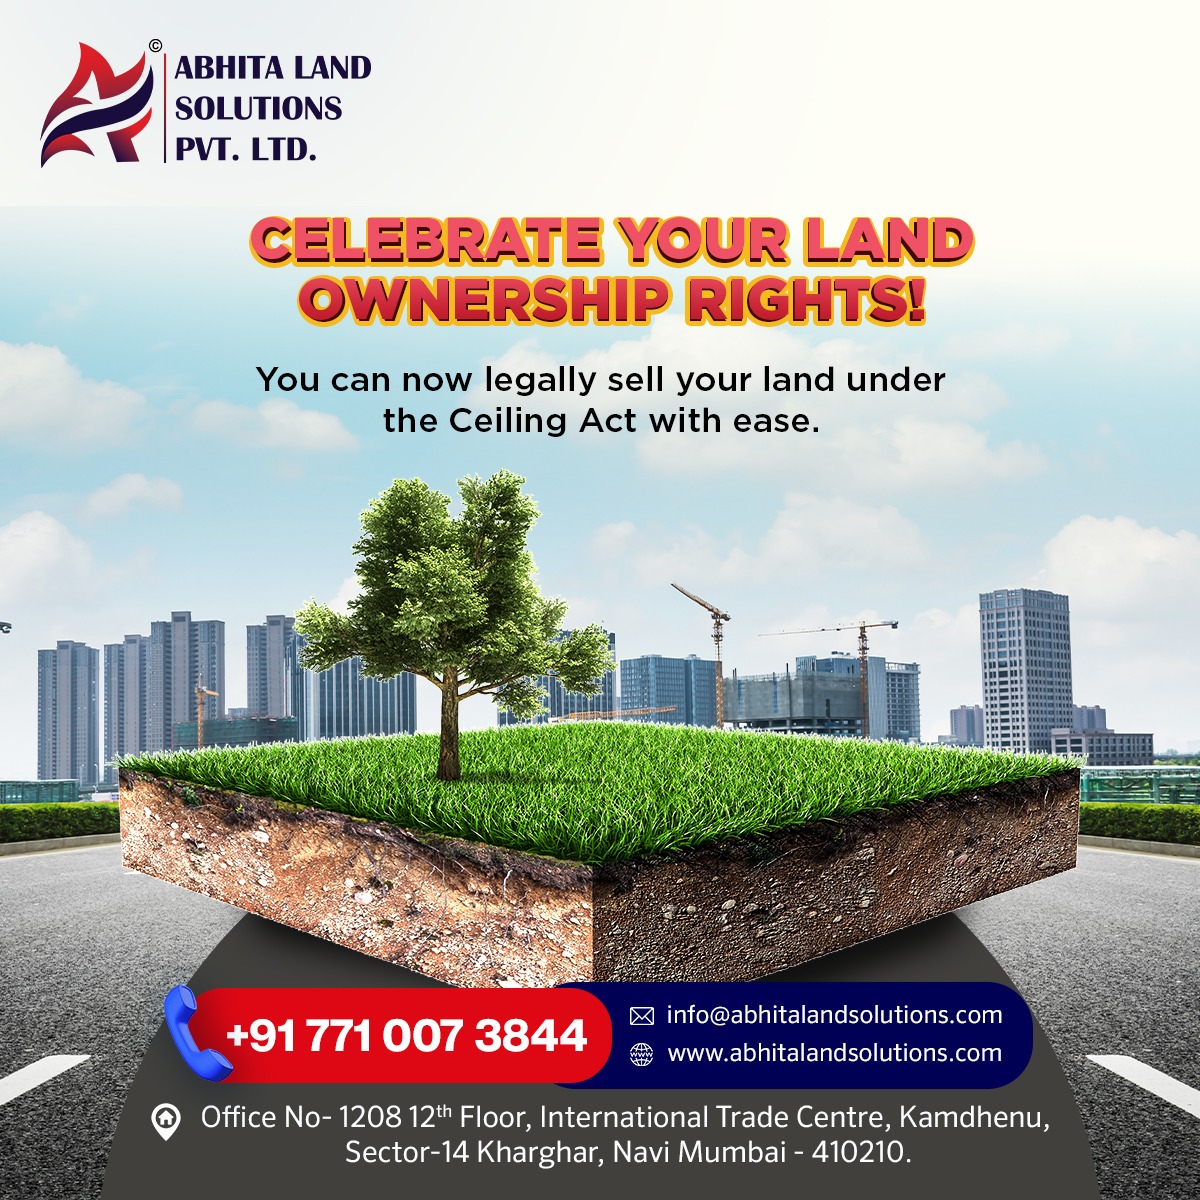 Celebrate Your Land Ownership Rights! You can now legally sell your land under the Ceiling Act with ease.
#LandOwnership #LandDisputes #LandMatters #LandRights #LegalAdvice #LegalServices #LegalSolutions #landsolution #landservice #LegalExperts #abhitalandsolutions #navimumbai